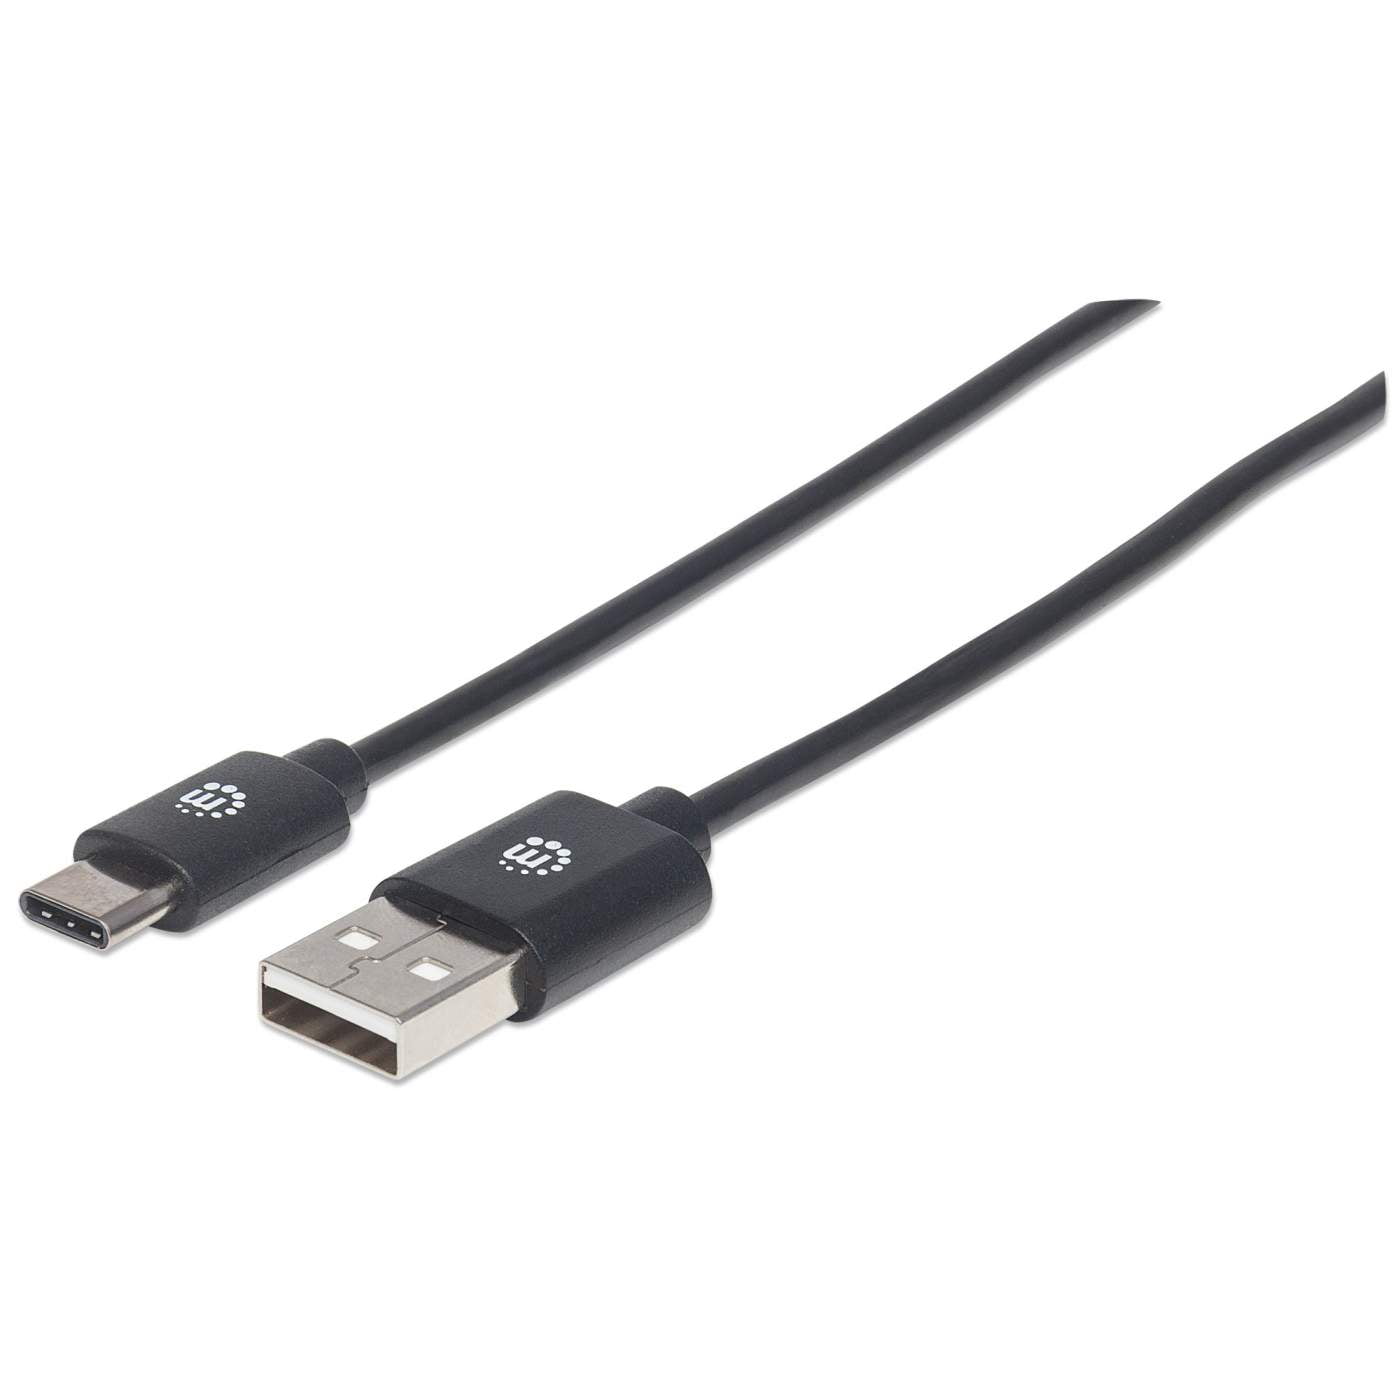 Hi-Speed USB-C Device Cable USB 2.0, Type-A Male to Type-C 480 3 ft., Black - Walmart.com